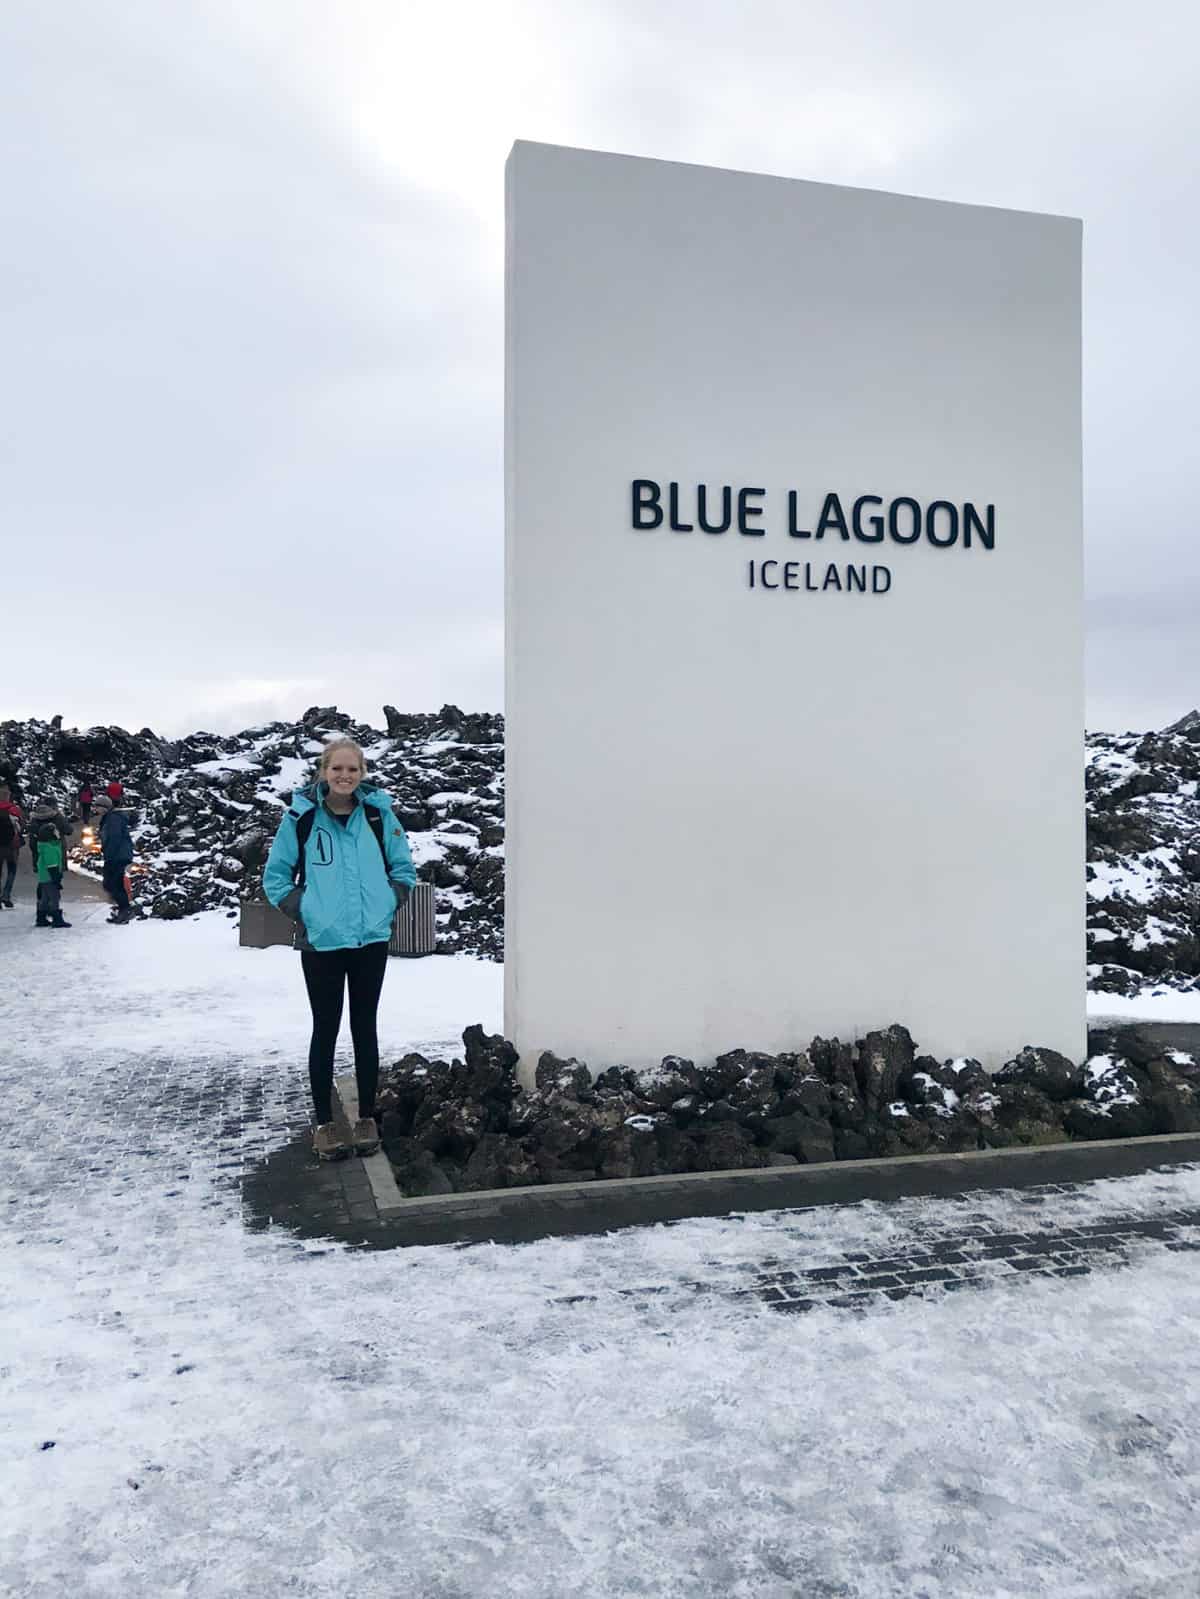 Iceland and Norway in 11 days is a true Scandinavian adventure! We traveled by train, bus, car and plane to see all that the two countries offered.